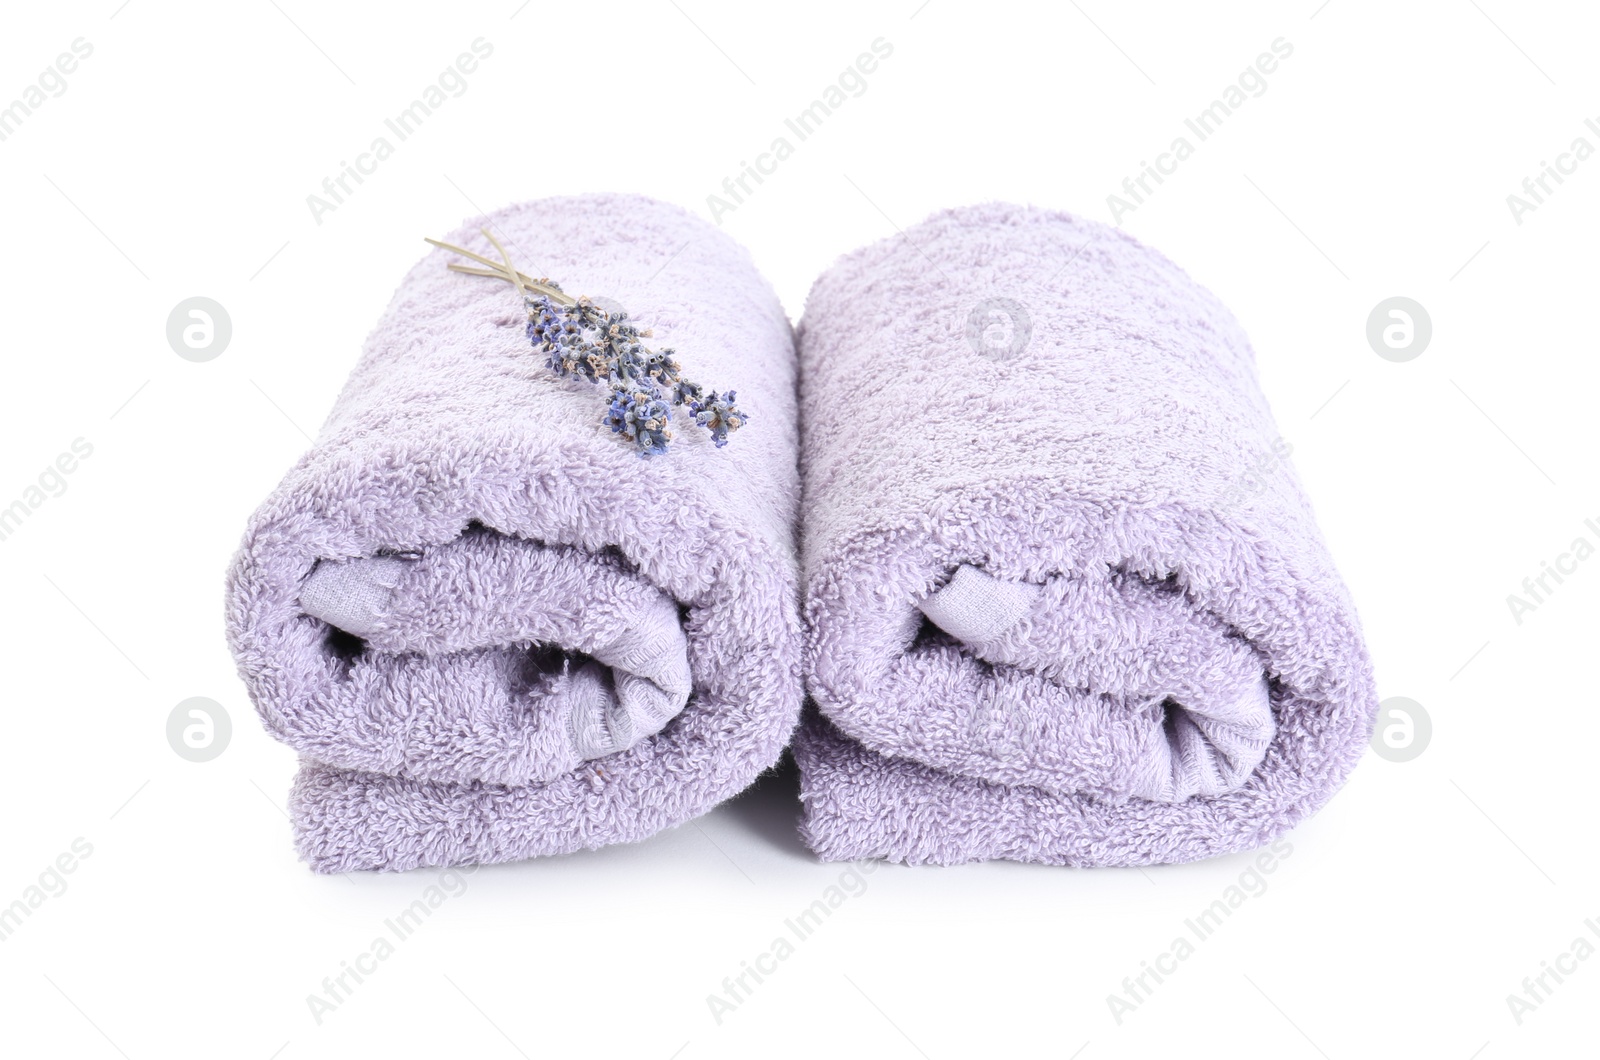 Photo of Rolled violet terry towels and dry lavender isolated on white